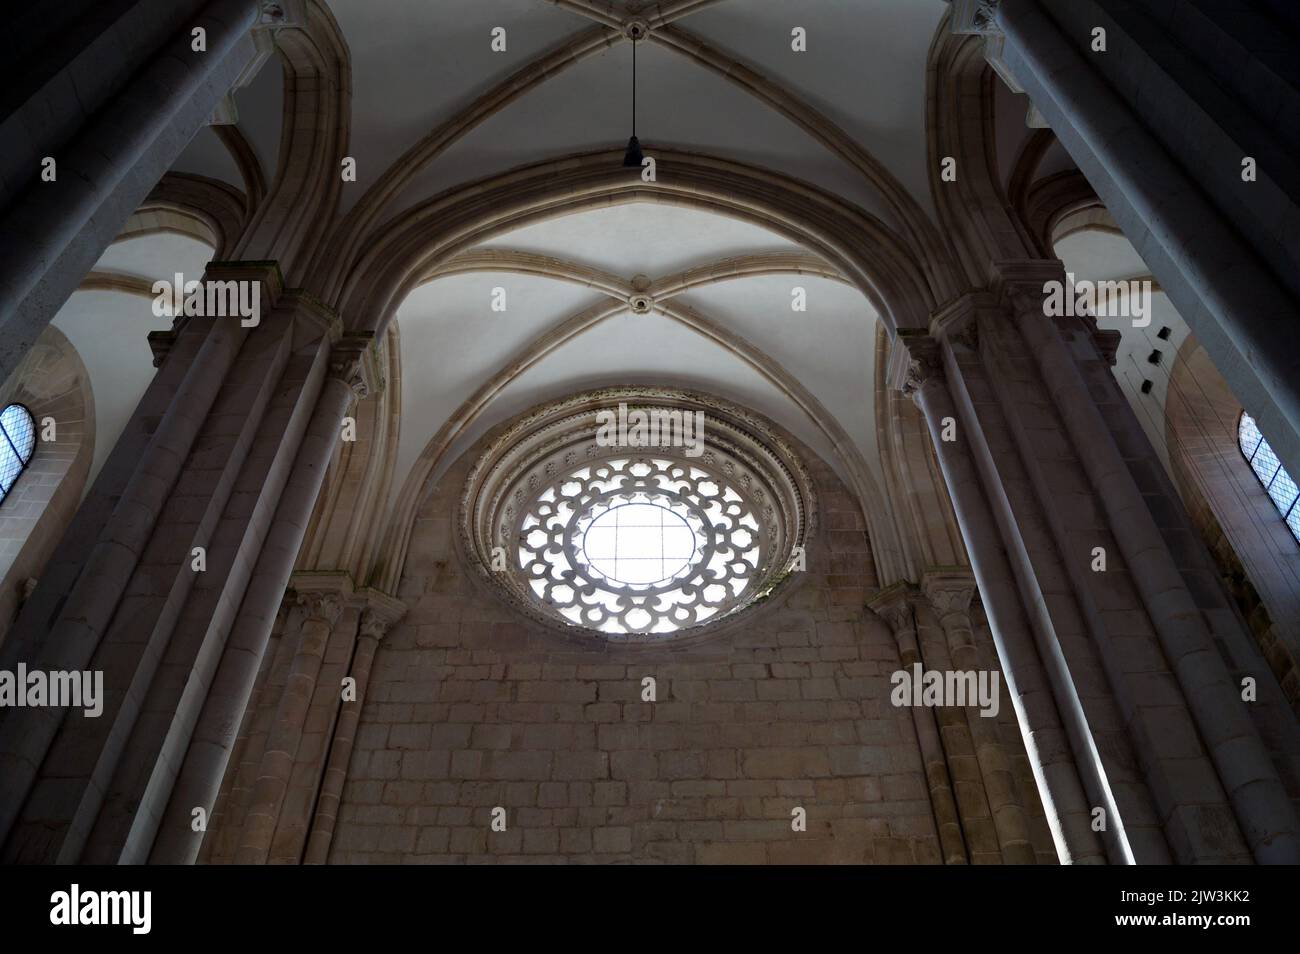 Vaulted ceiling and rose window, interior view, church the Monastery of Alcobaca, Portugal Stock Photo